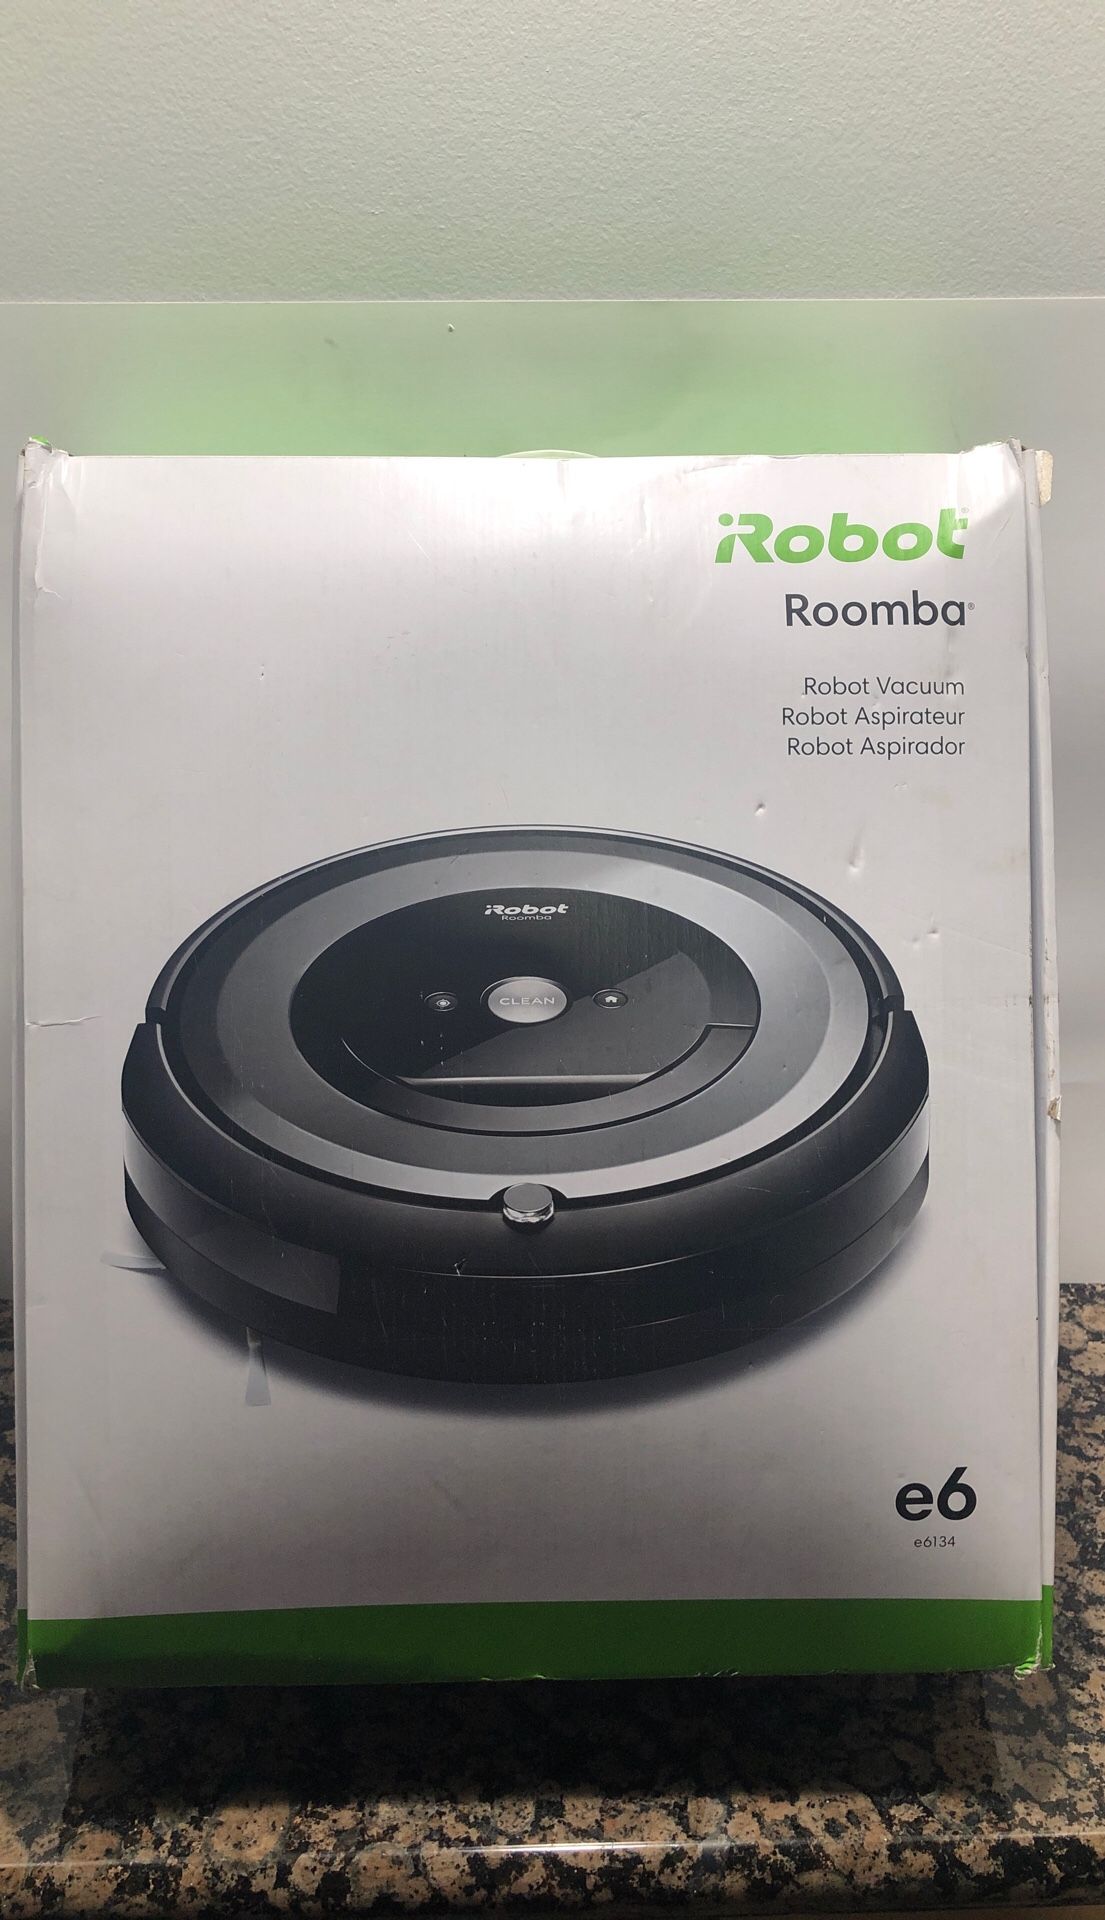 iRobot Roomba E6 E6134 Wi-fi Connected Robot Vacuum Cleaner Brand NEW in Box